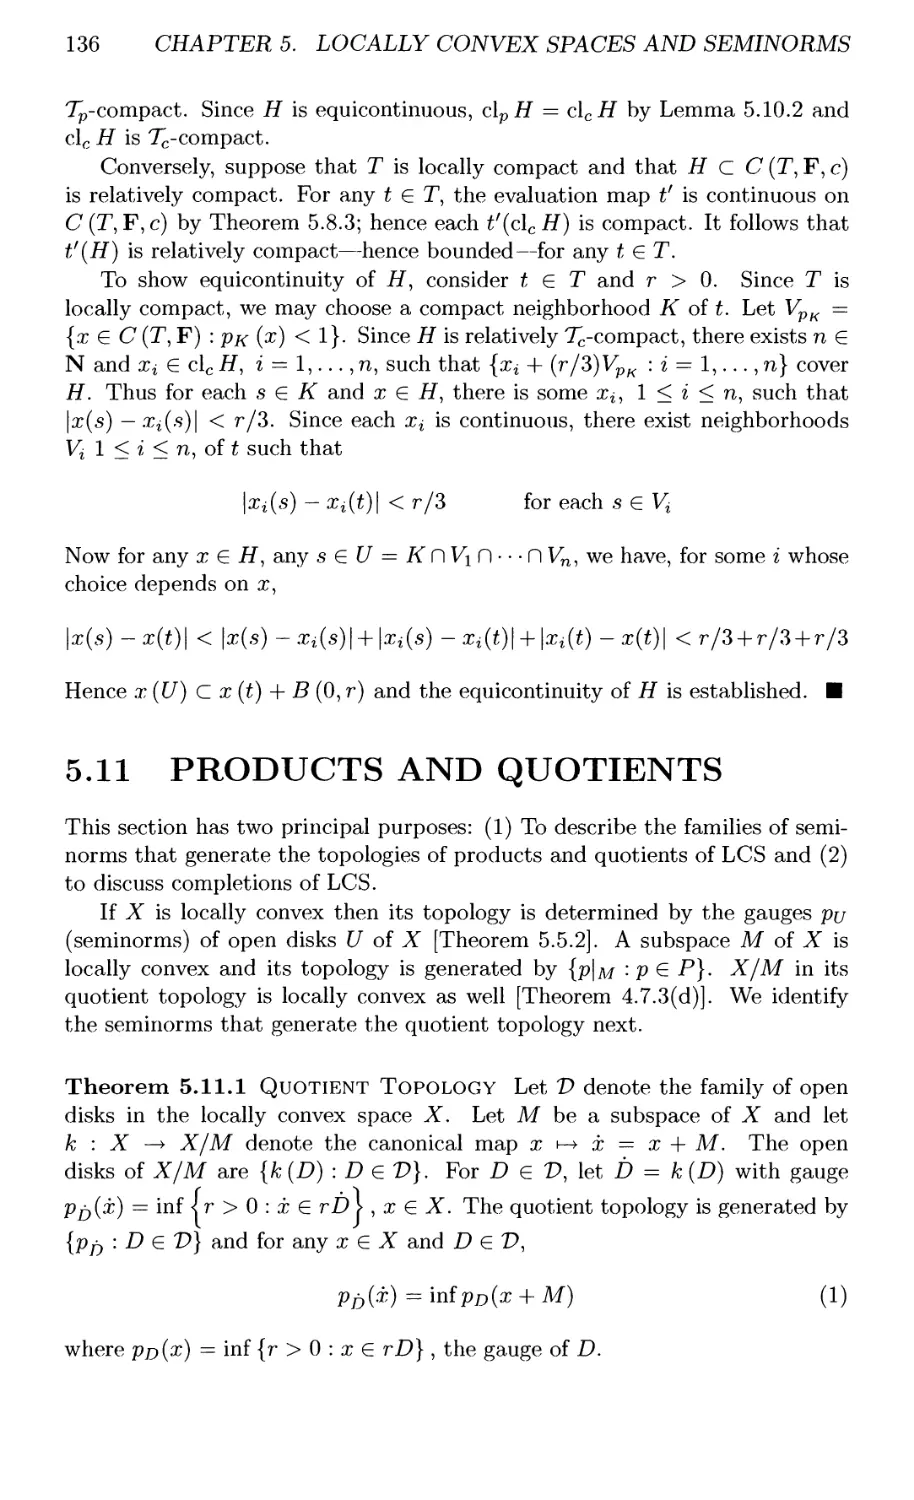 5.11 PRODUCTS AND QUOTIENTS